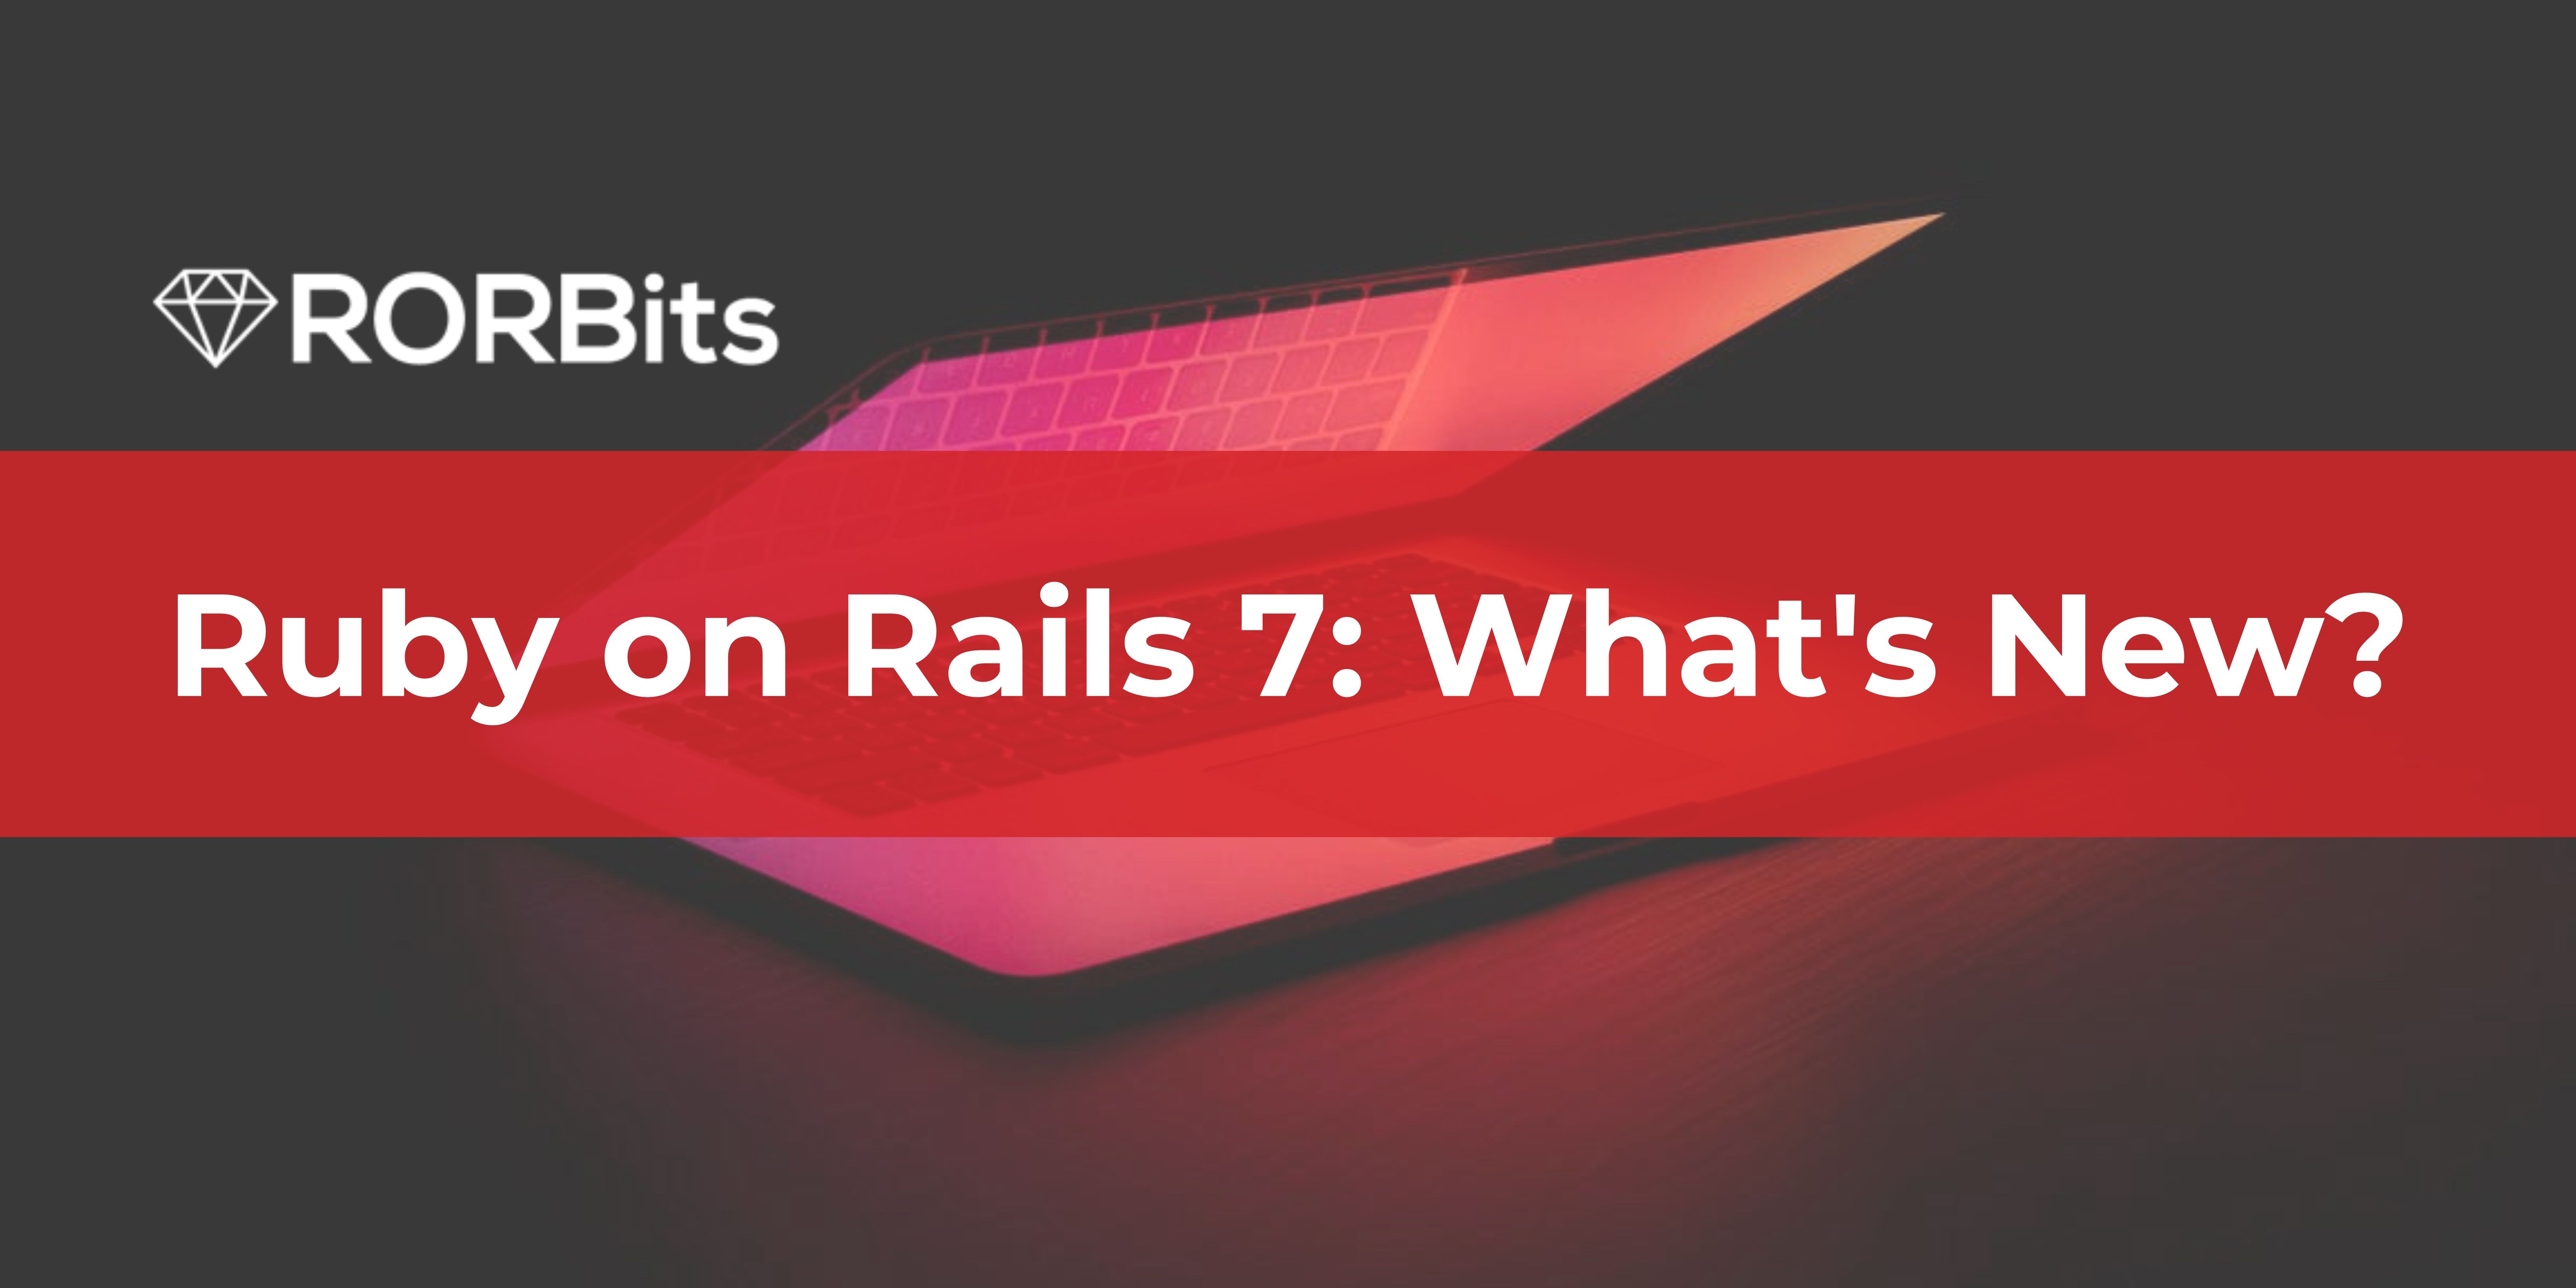 Ruby on Rails 7: What’s New?